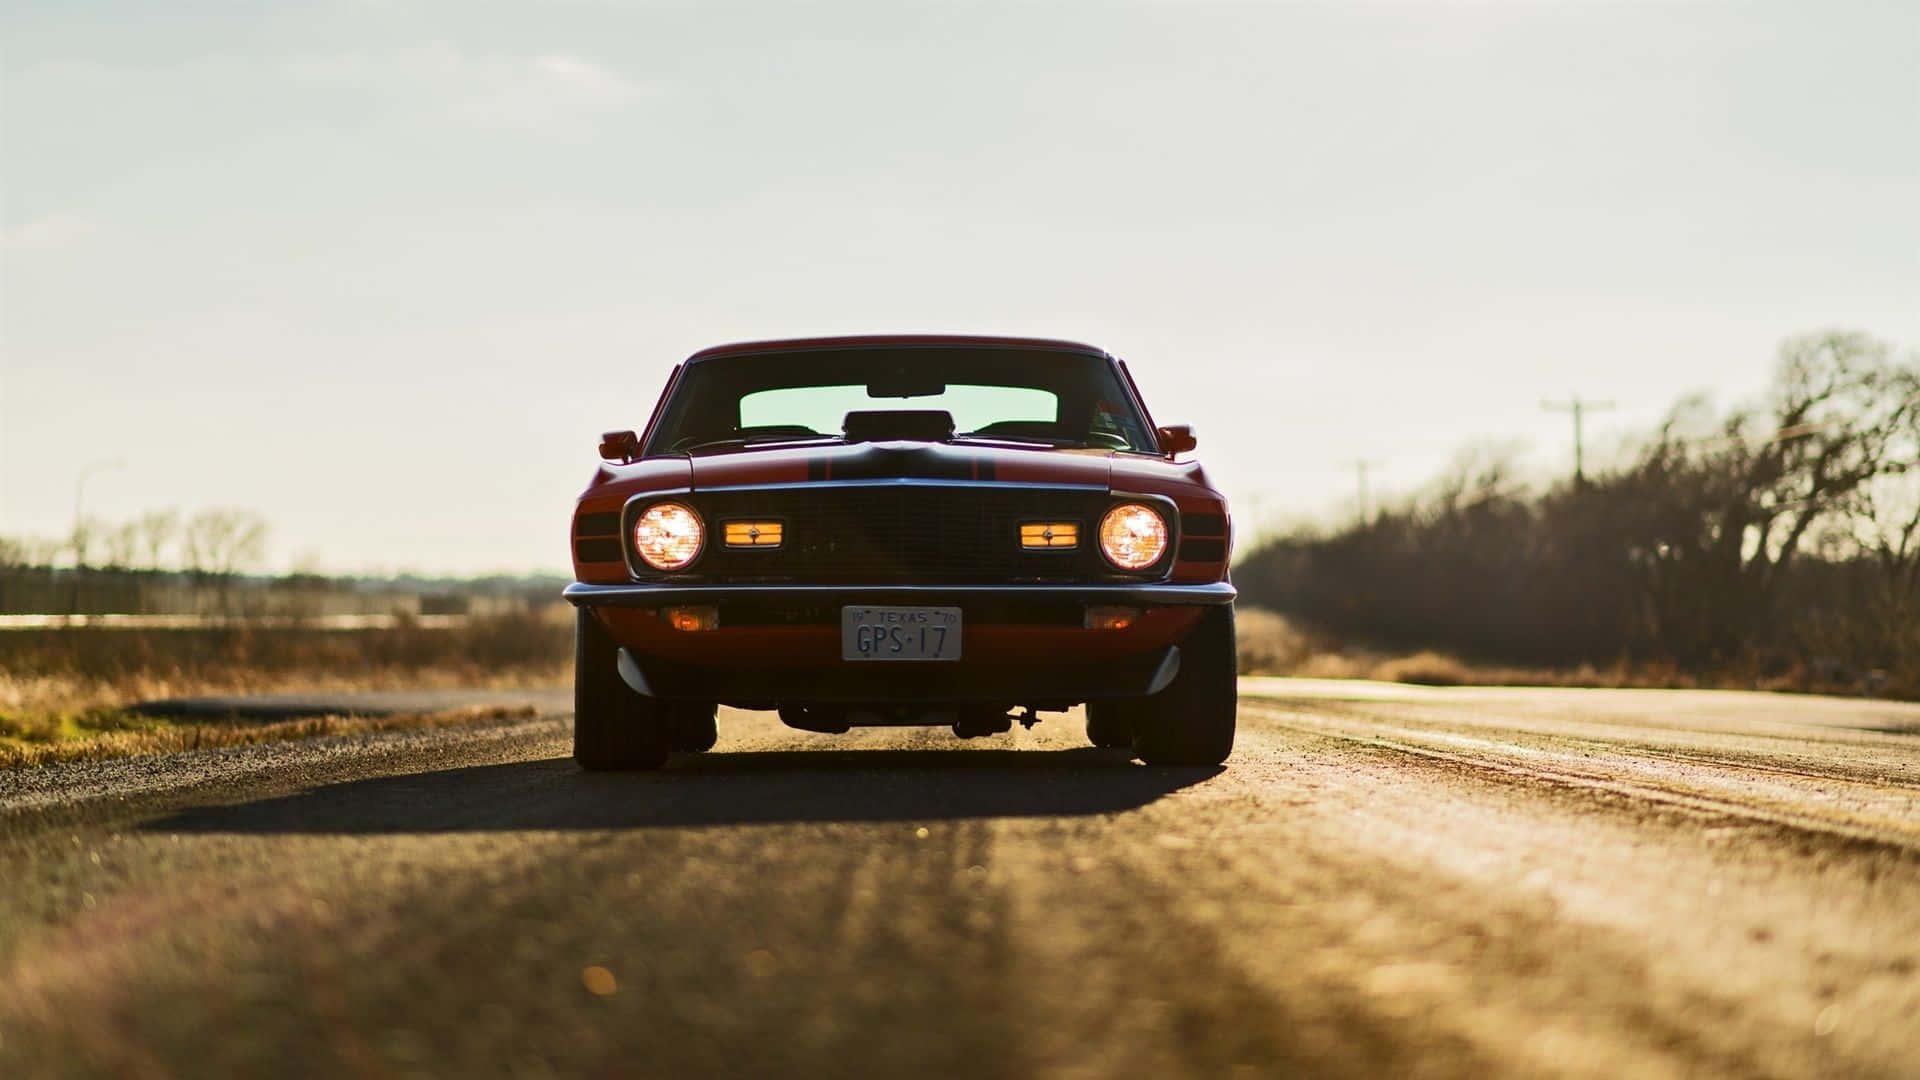 Sleek Ford Mustang Mach 1 in Action Wallpaper